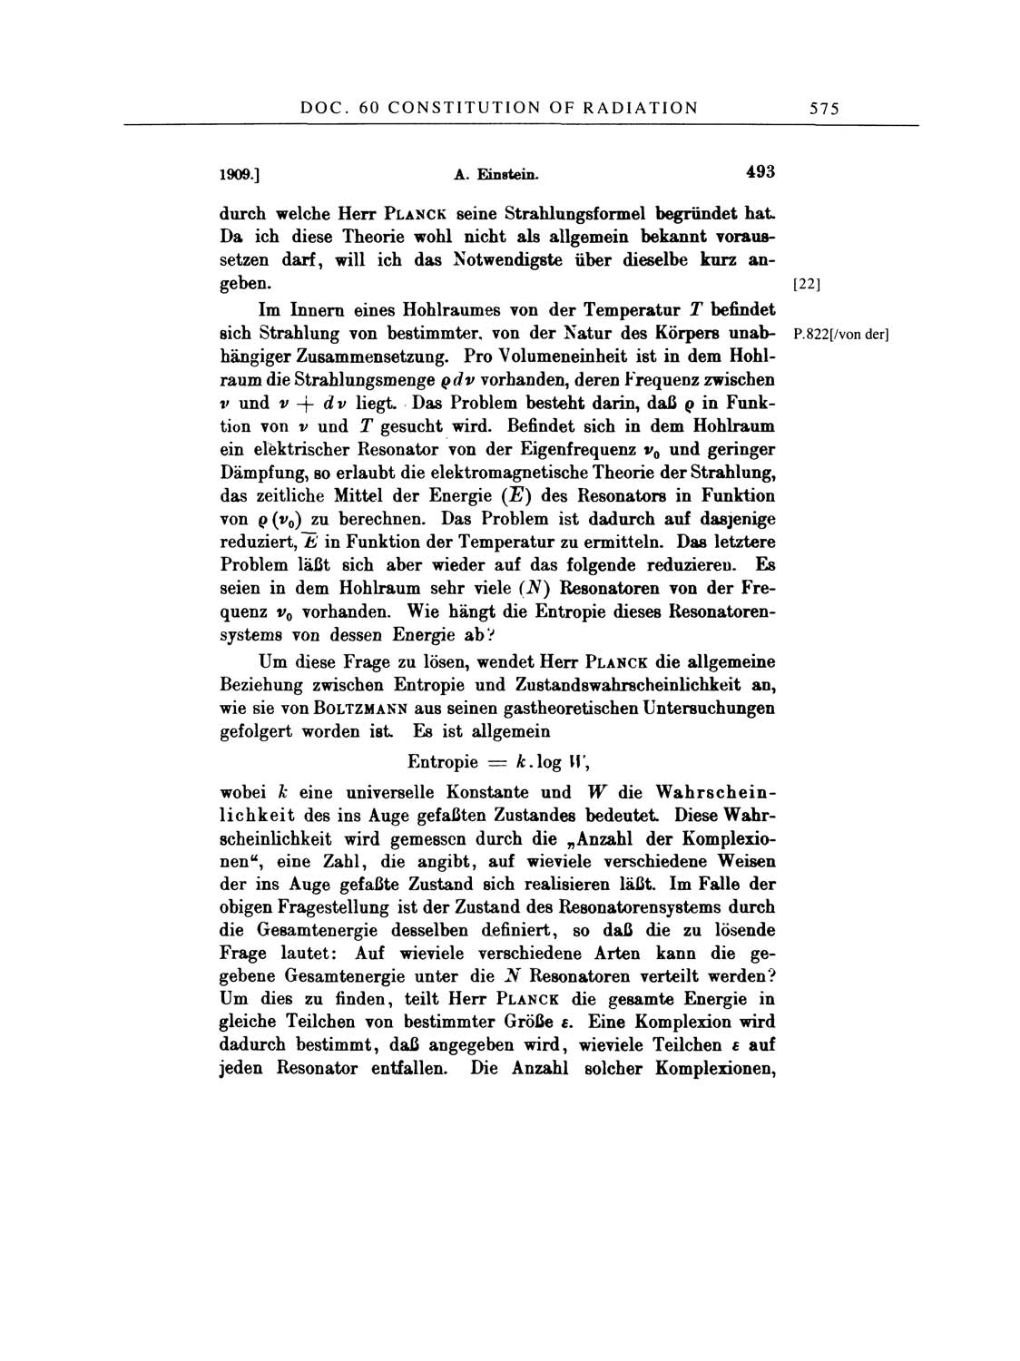 Volume 2: The Swiss Years: Writings, 1900-1909 page 575